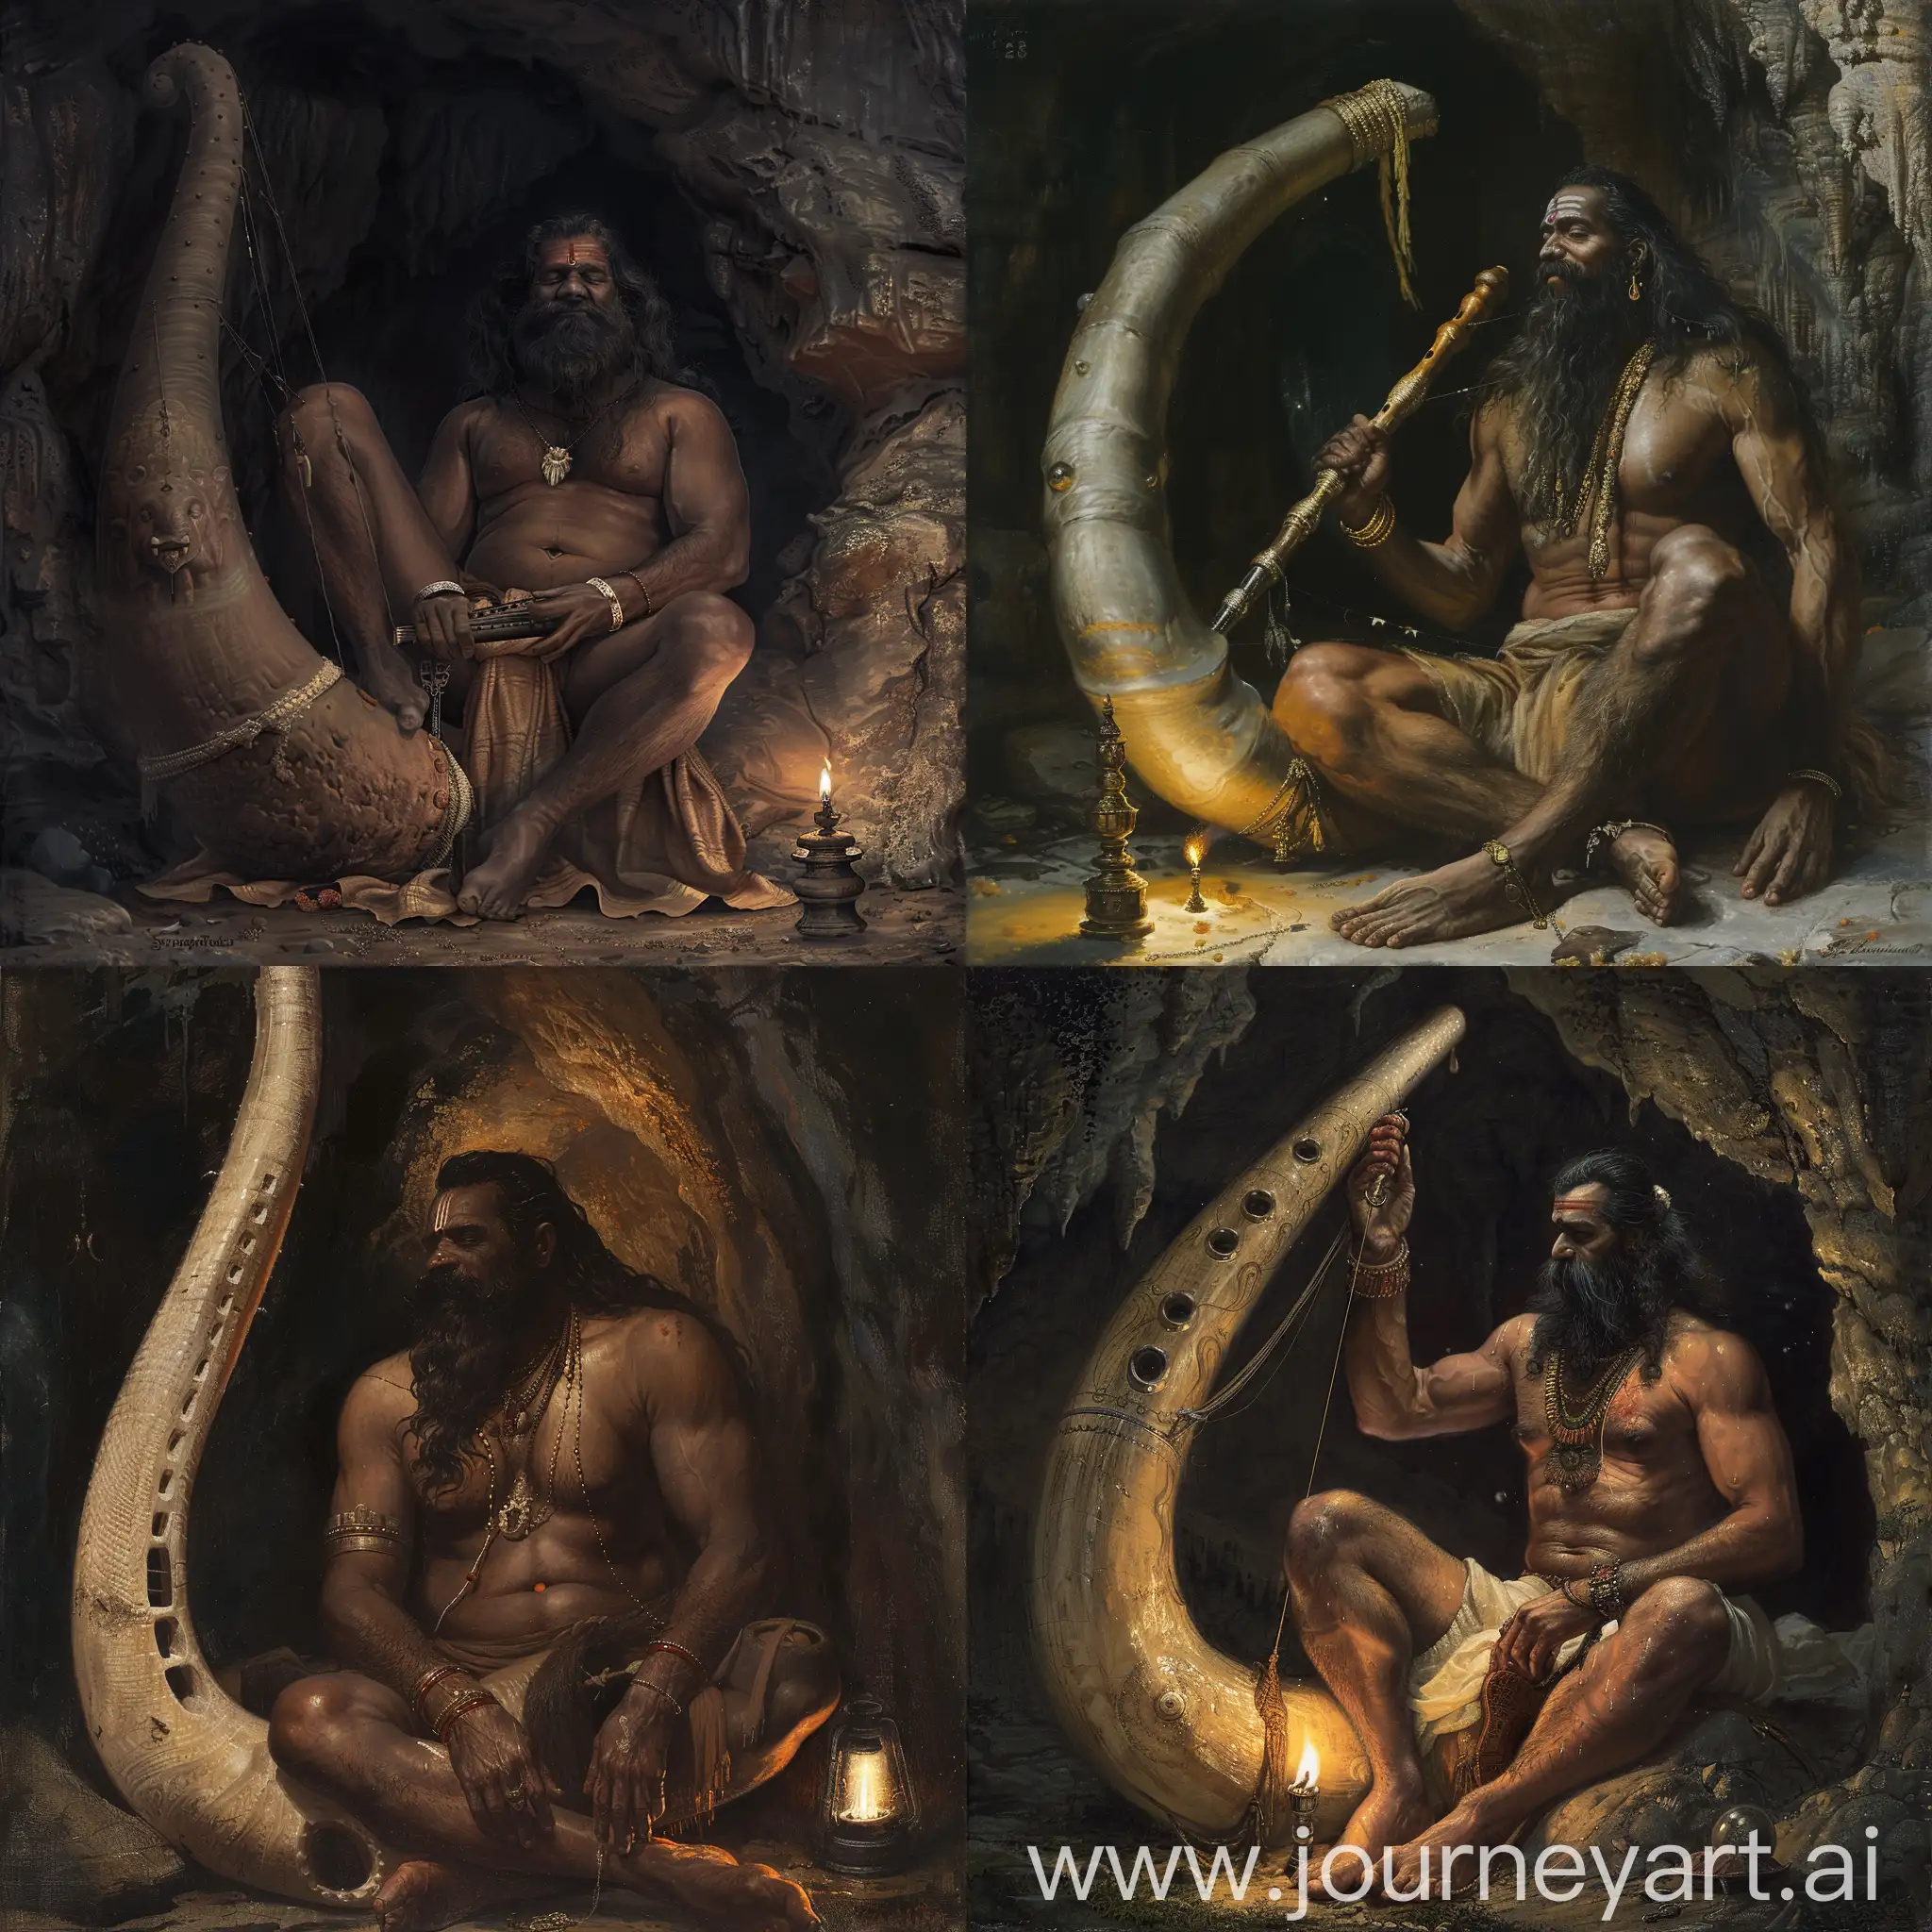 Ancient-South-Indian-Musician-Playing-Elephant-Tusk-Instrument-by-Cave-Temple-at-Night